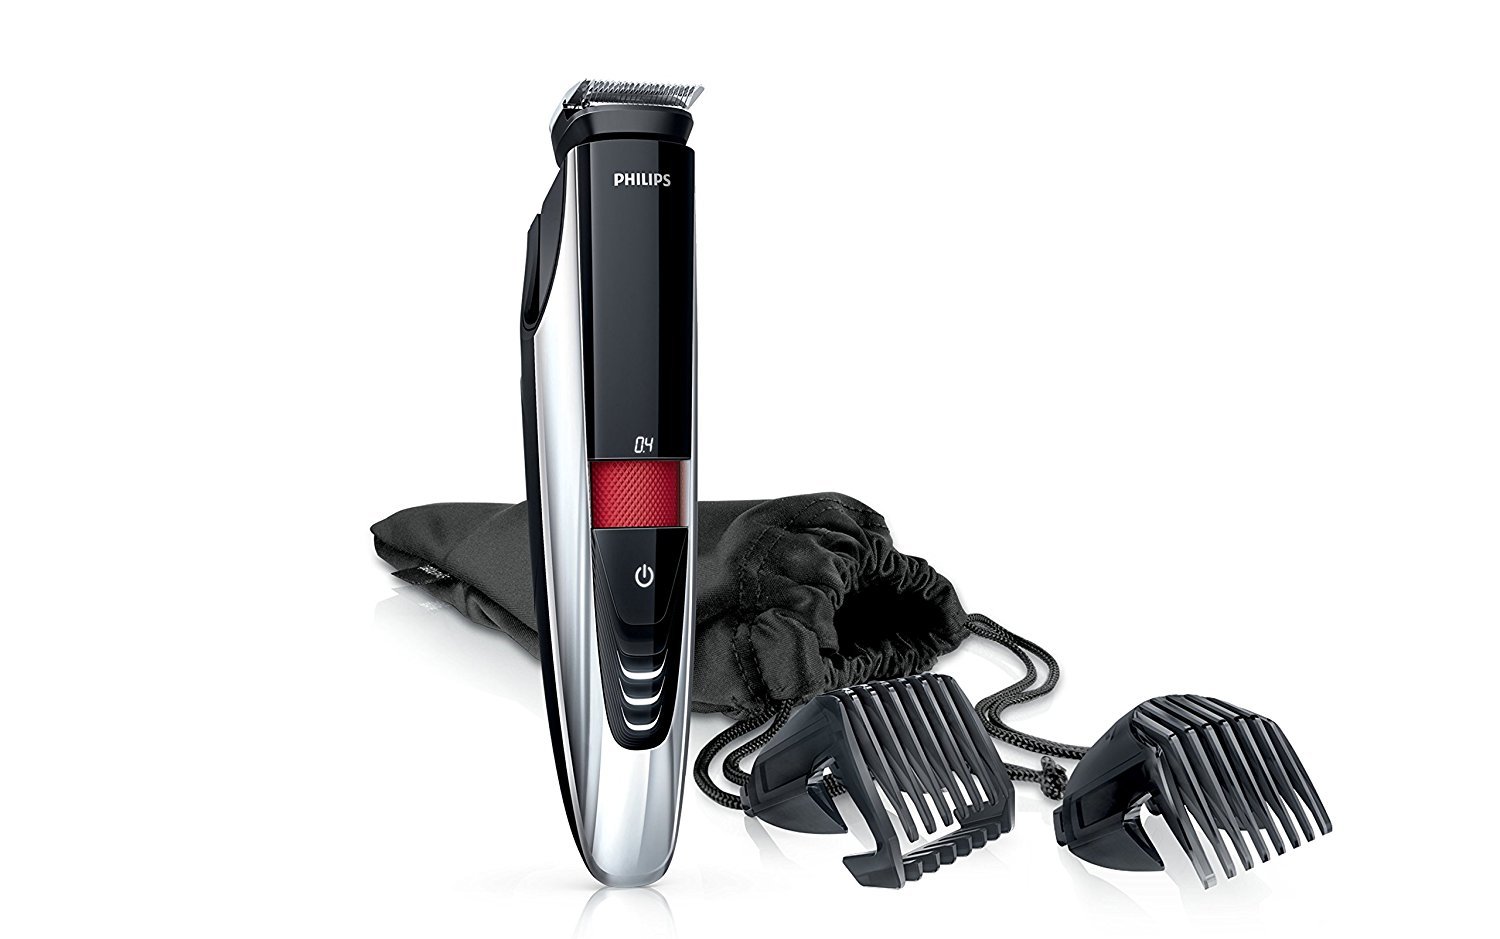 Philips series 9000 Laser Guided Beard Trimmer contents